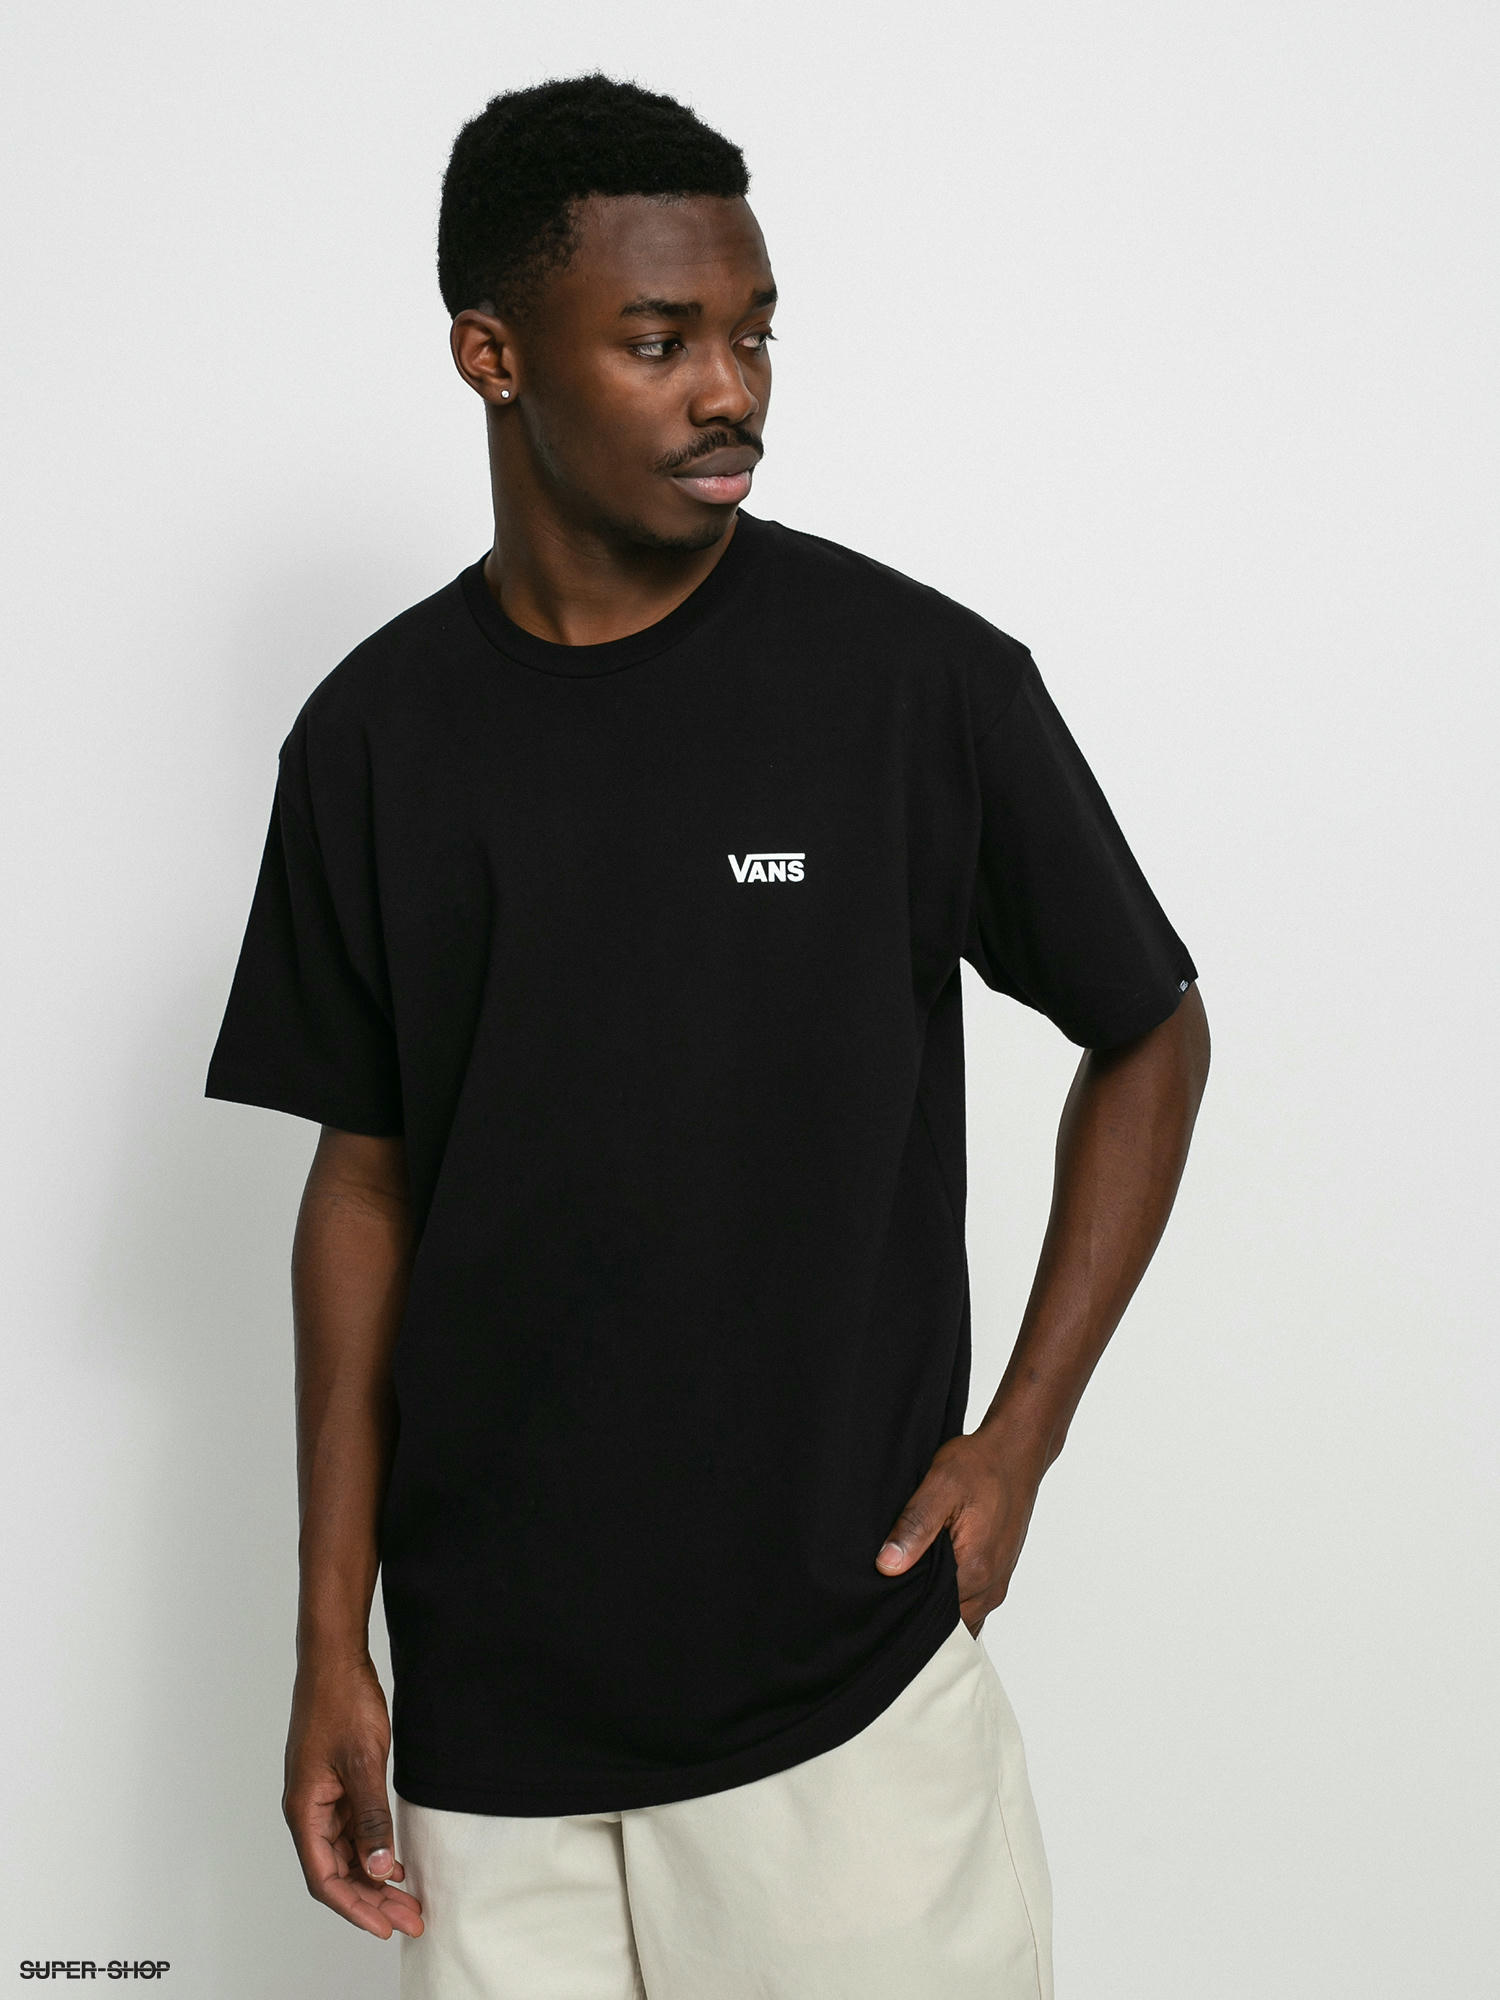 Sculptor More than anything collection Vans Left Chest Logo Plus T-shirt (black/white)